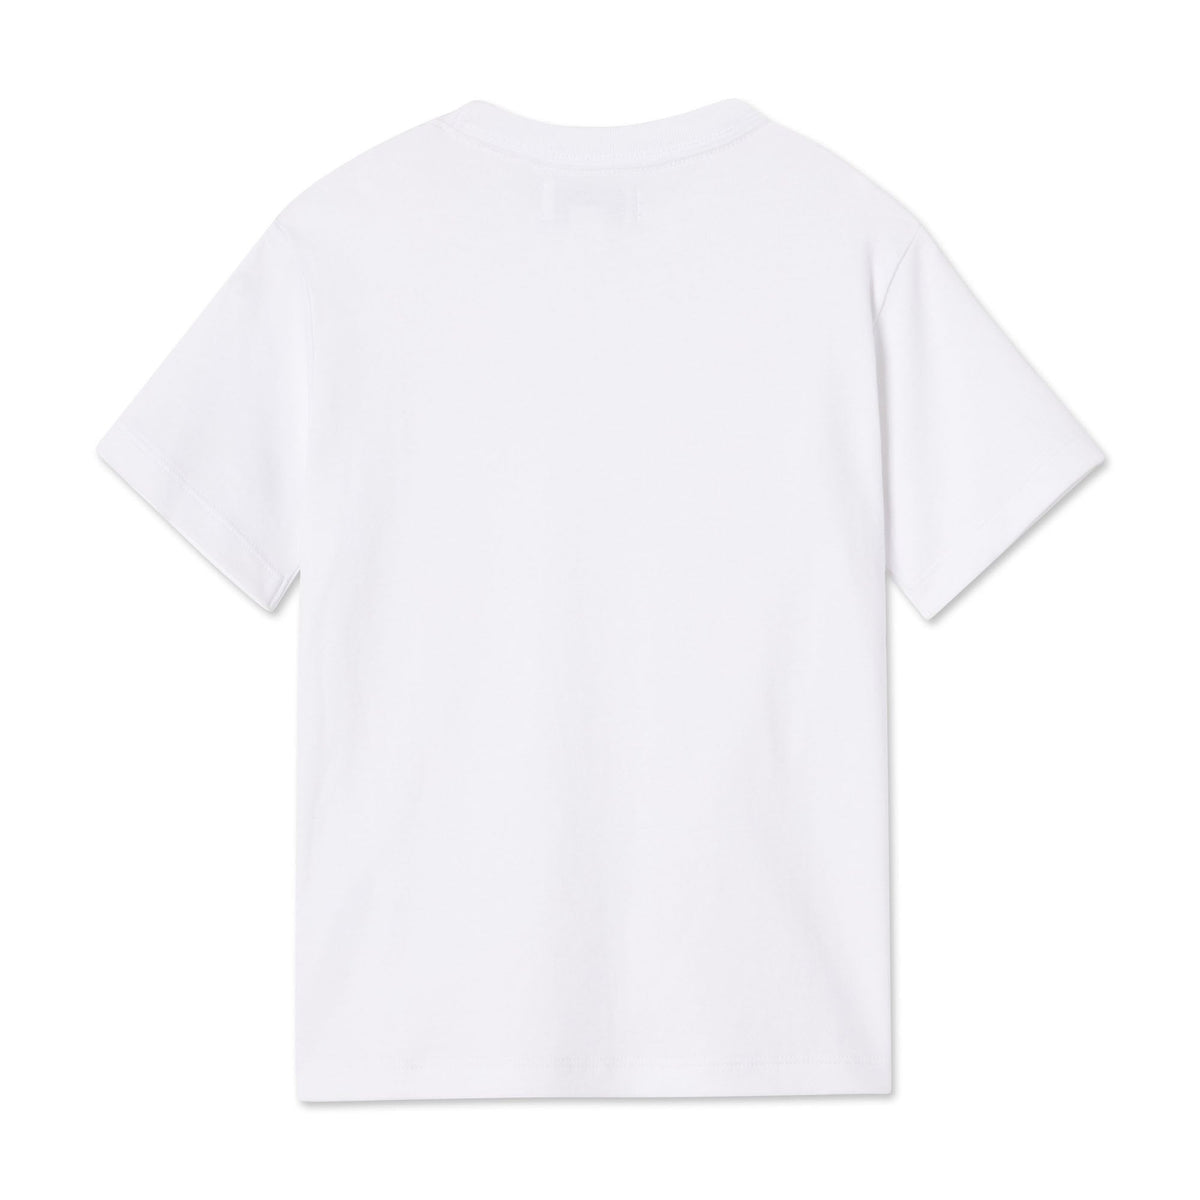 Classic and Preppy Kellan Short Sleeve Pocket T-Shirt Solid, Bright White-Shirts and Tops-CPC - Classic Prep Childrenswear